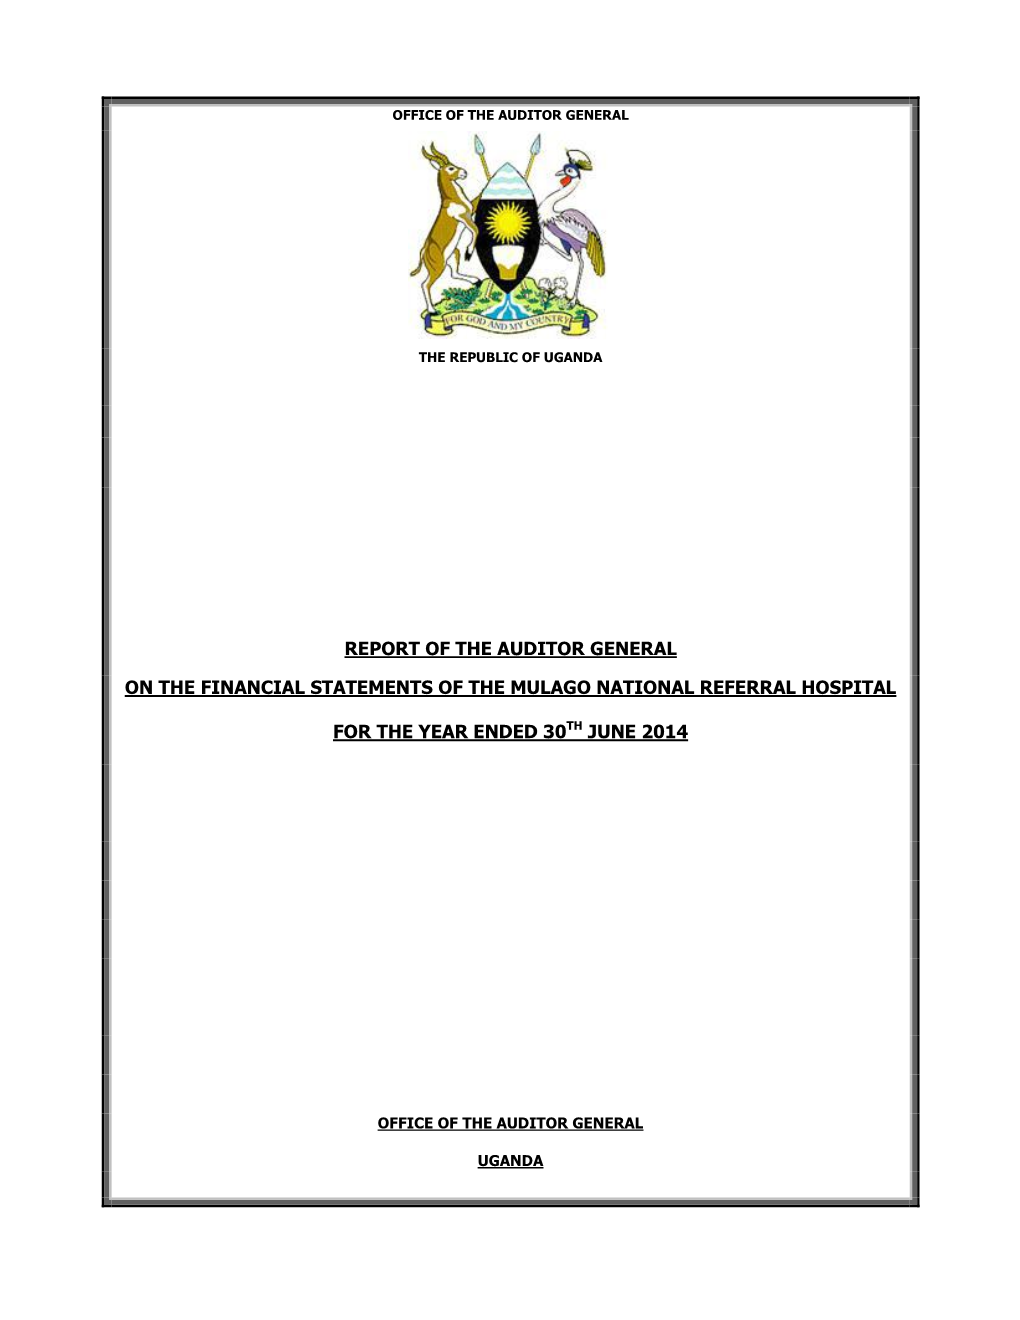 Report of the Auditor General on the Financial Statements of the Mulago National Referral Hospital for the Year Ended 30Th June 2014